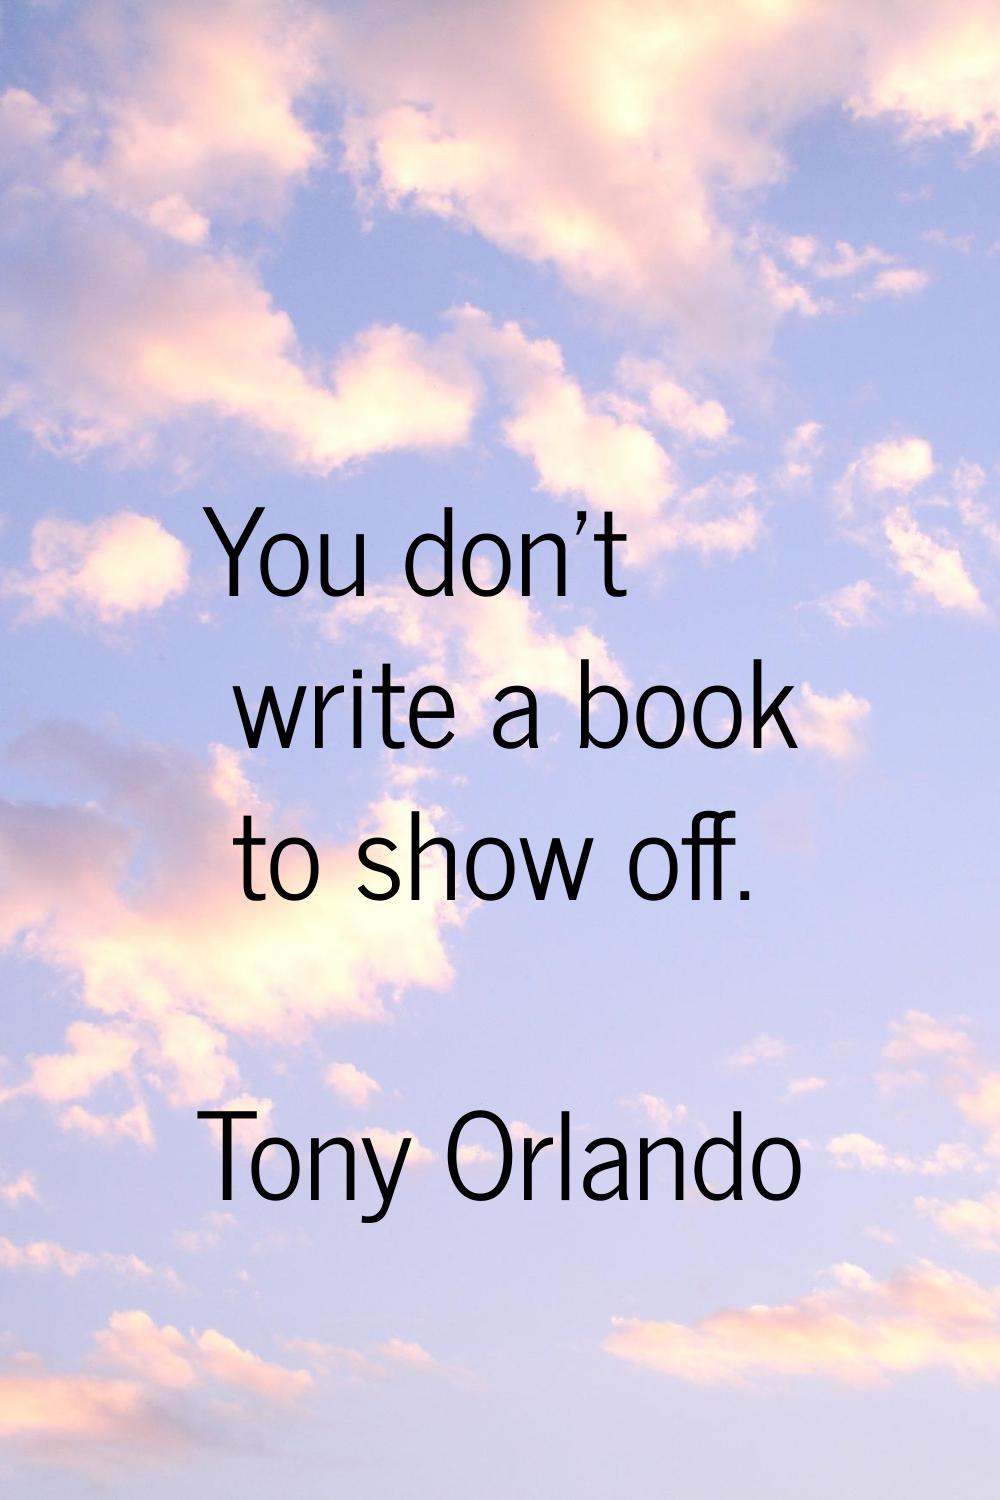 You don't write a book to show off.